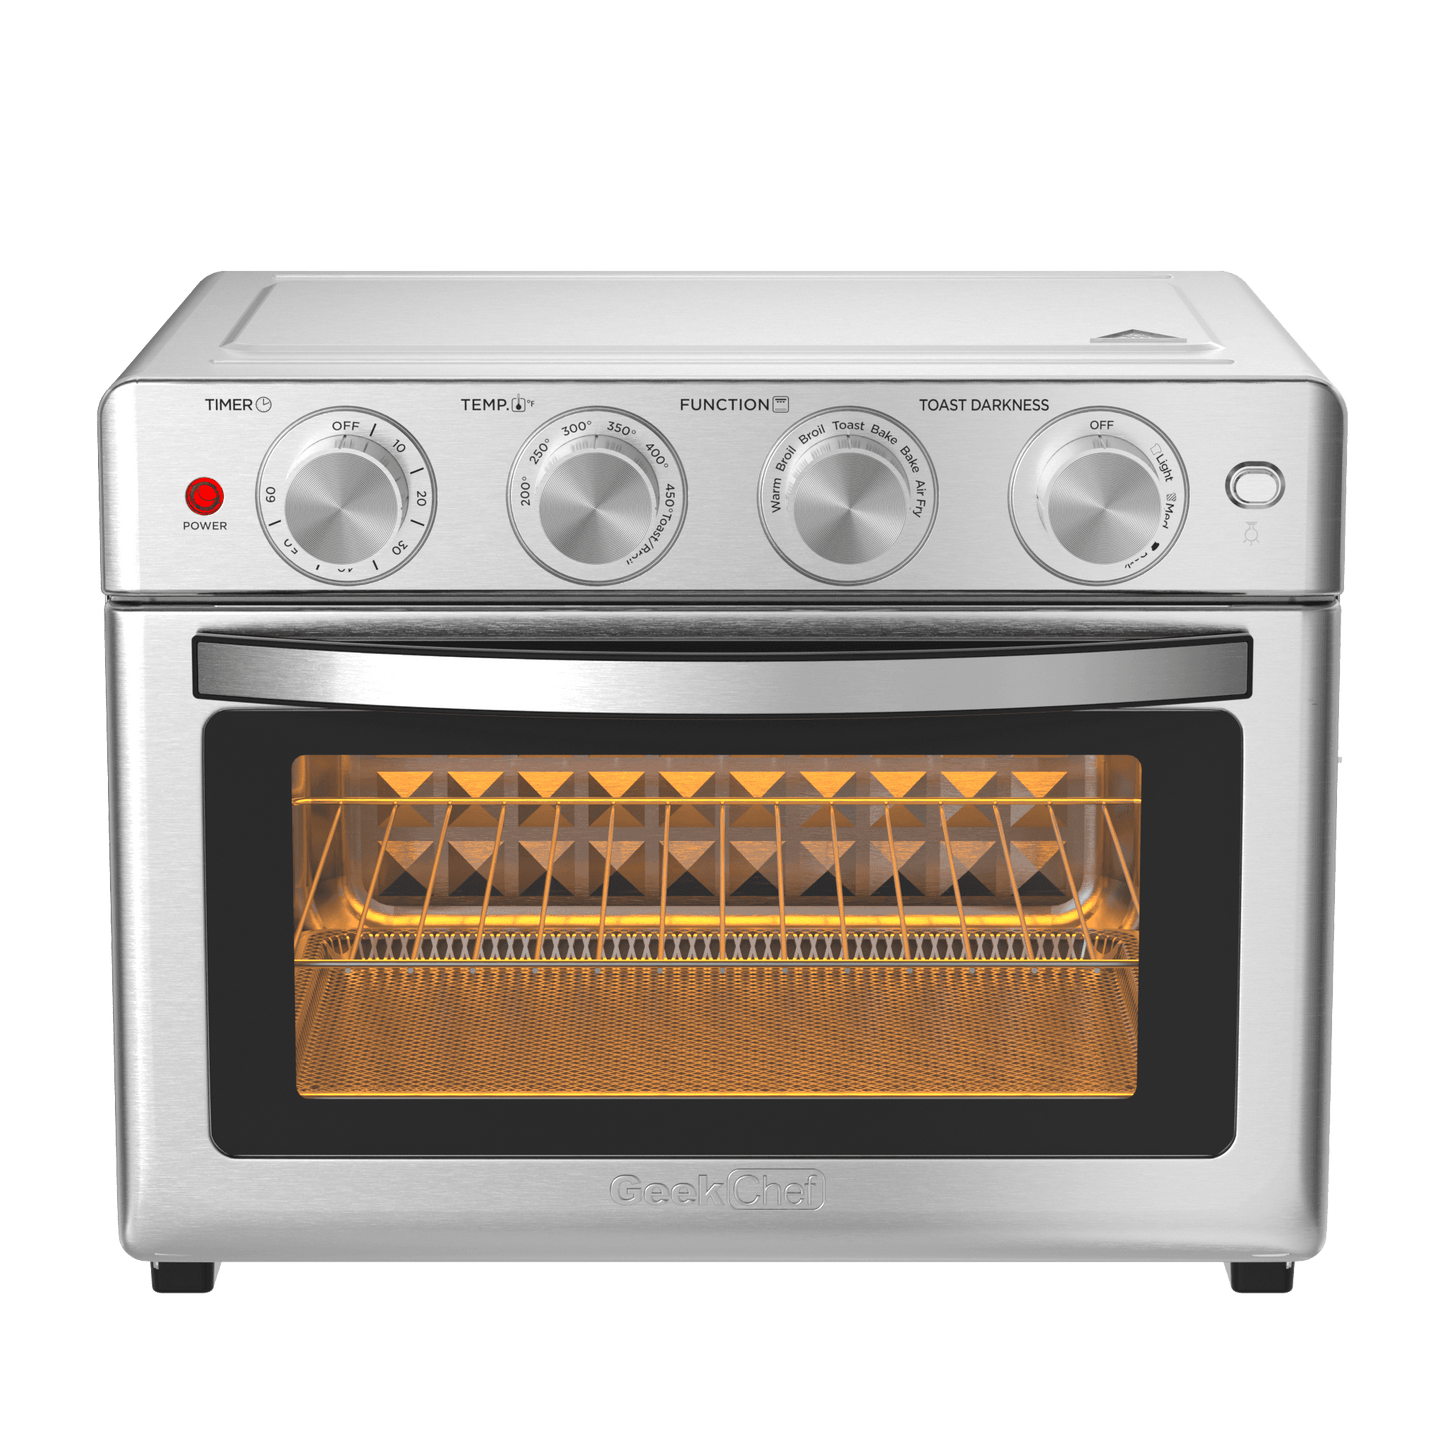 Geek Chef Air Fryer, 6 Slice 26QT/26L Air Fryer Fry Oil-Free, Extra Large Toaster Oven Combo, Air Fryer Oven, Roast, Bake, Broil, Reheat, Convection